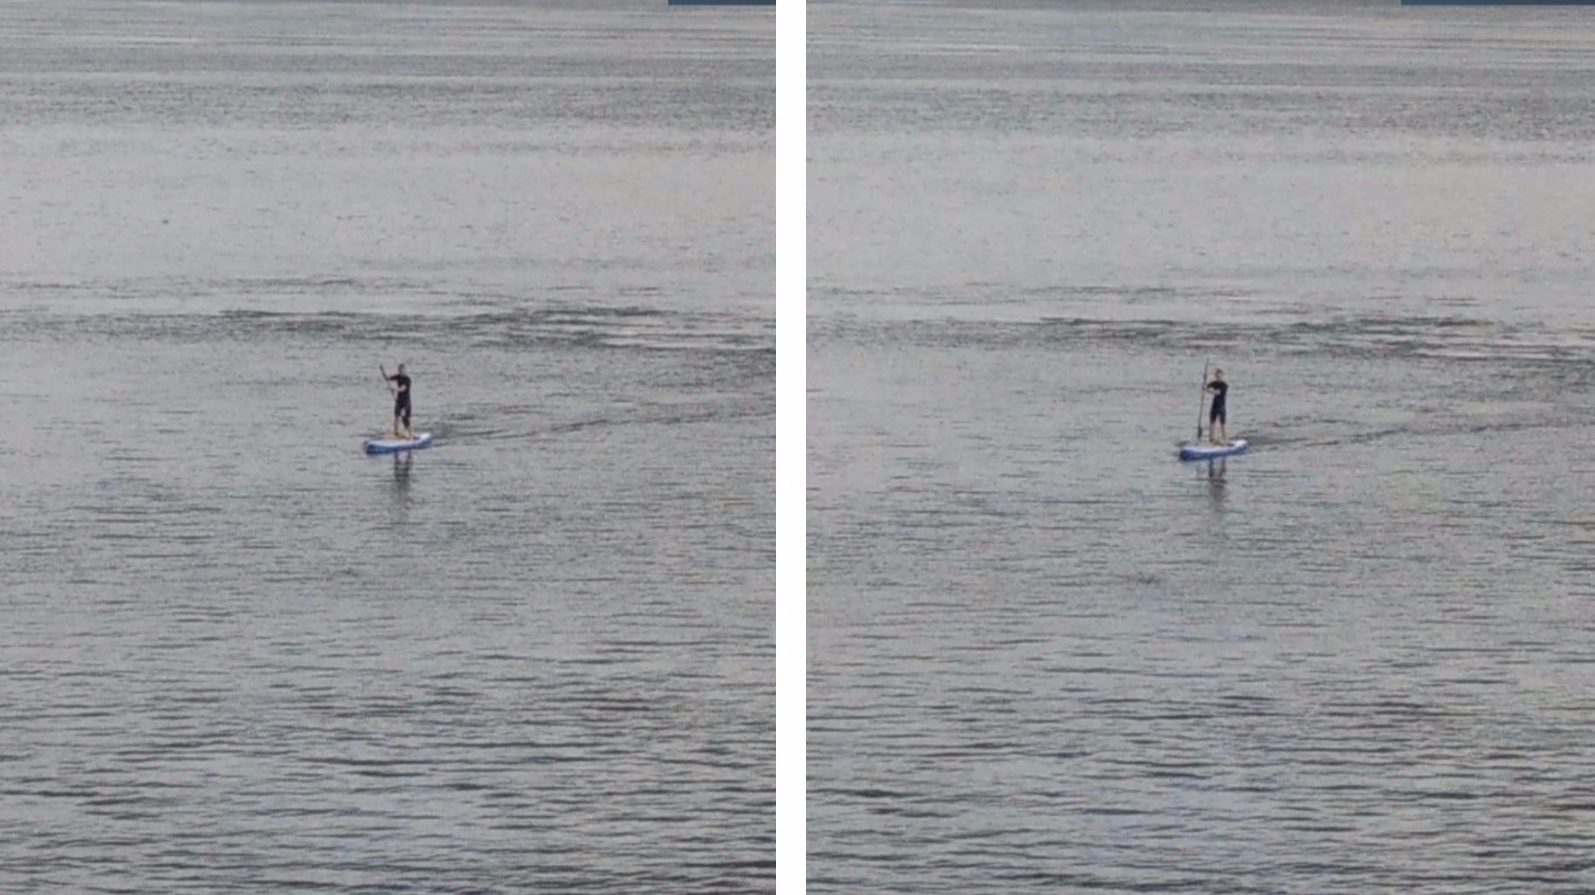 The lone River Tay paddle boarder